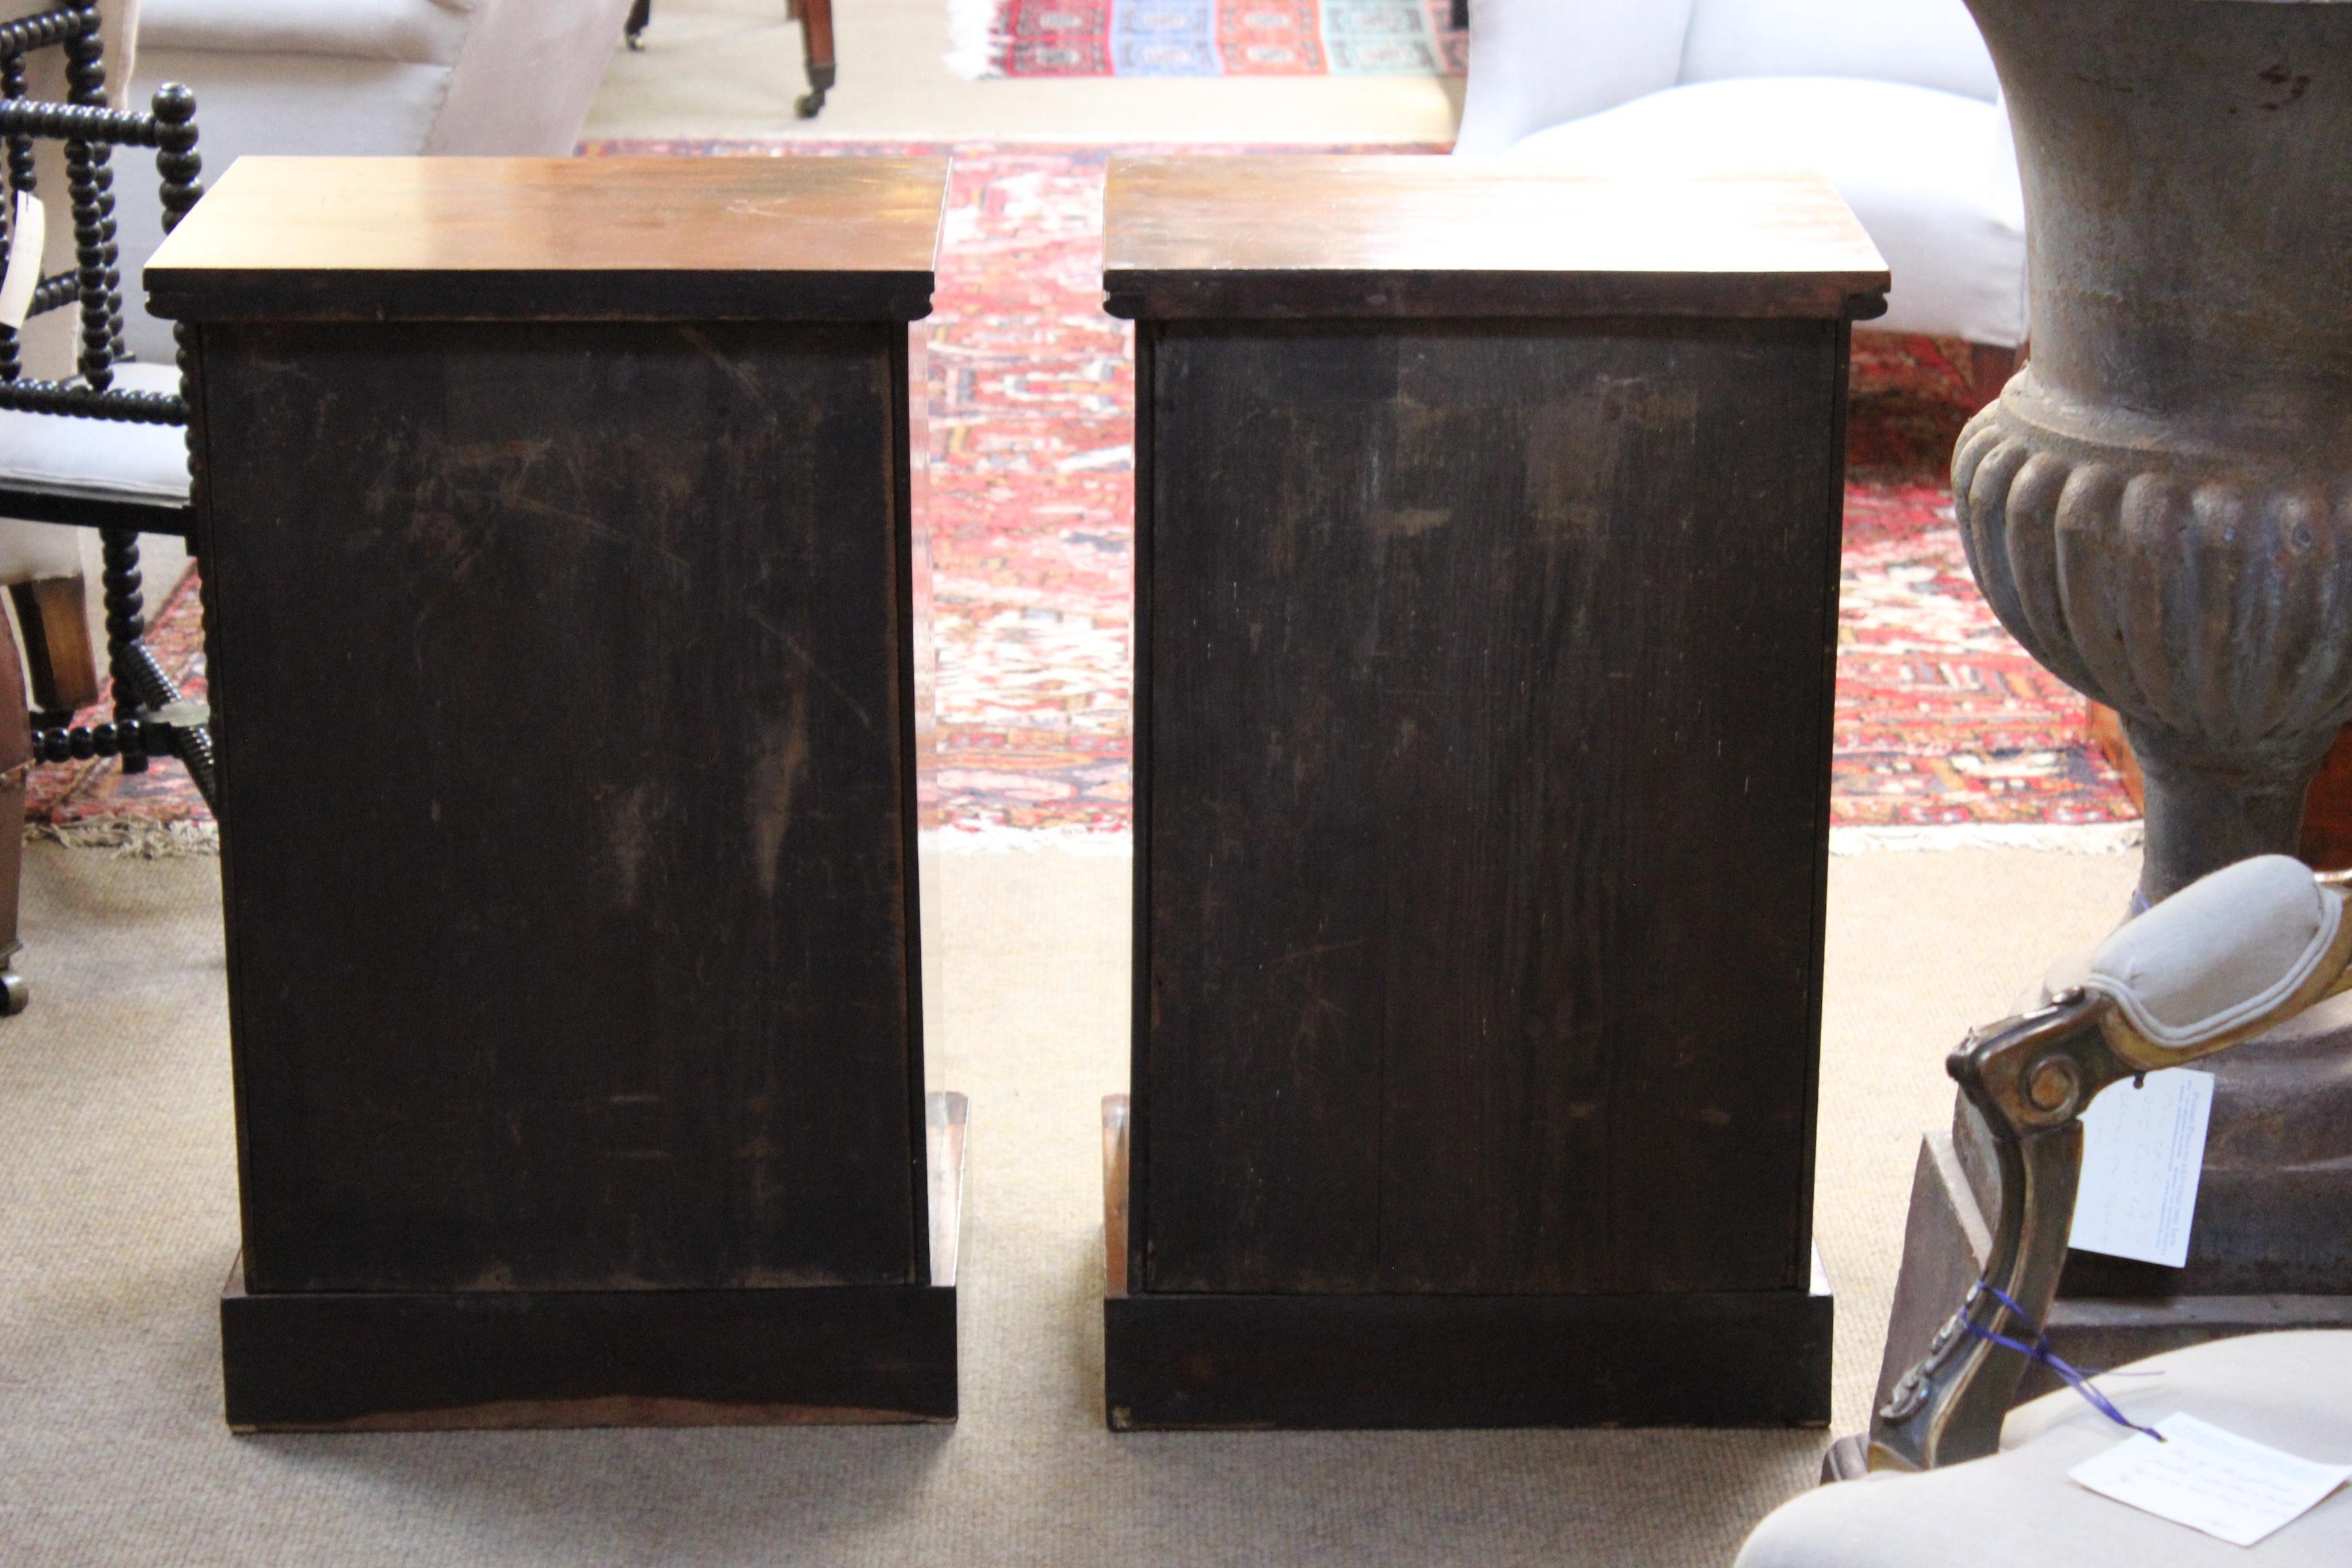 5938
Pair of 19thc Mahogany Pedestal Bedside Cupboards
With flame mahogany on arch doors on plinth base

Items can be delivered by independent carrier but please note NOT all items are at 31 Cheap Street.  Please call before visiting the showroom